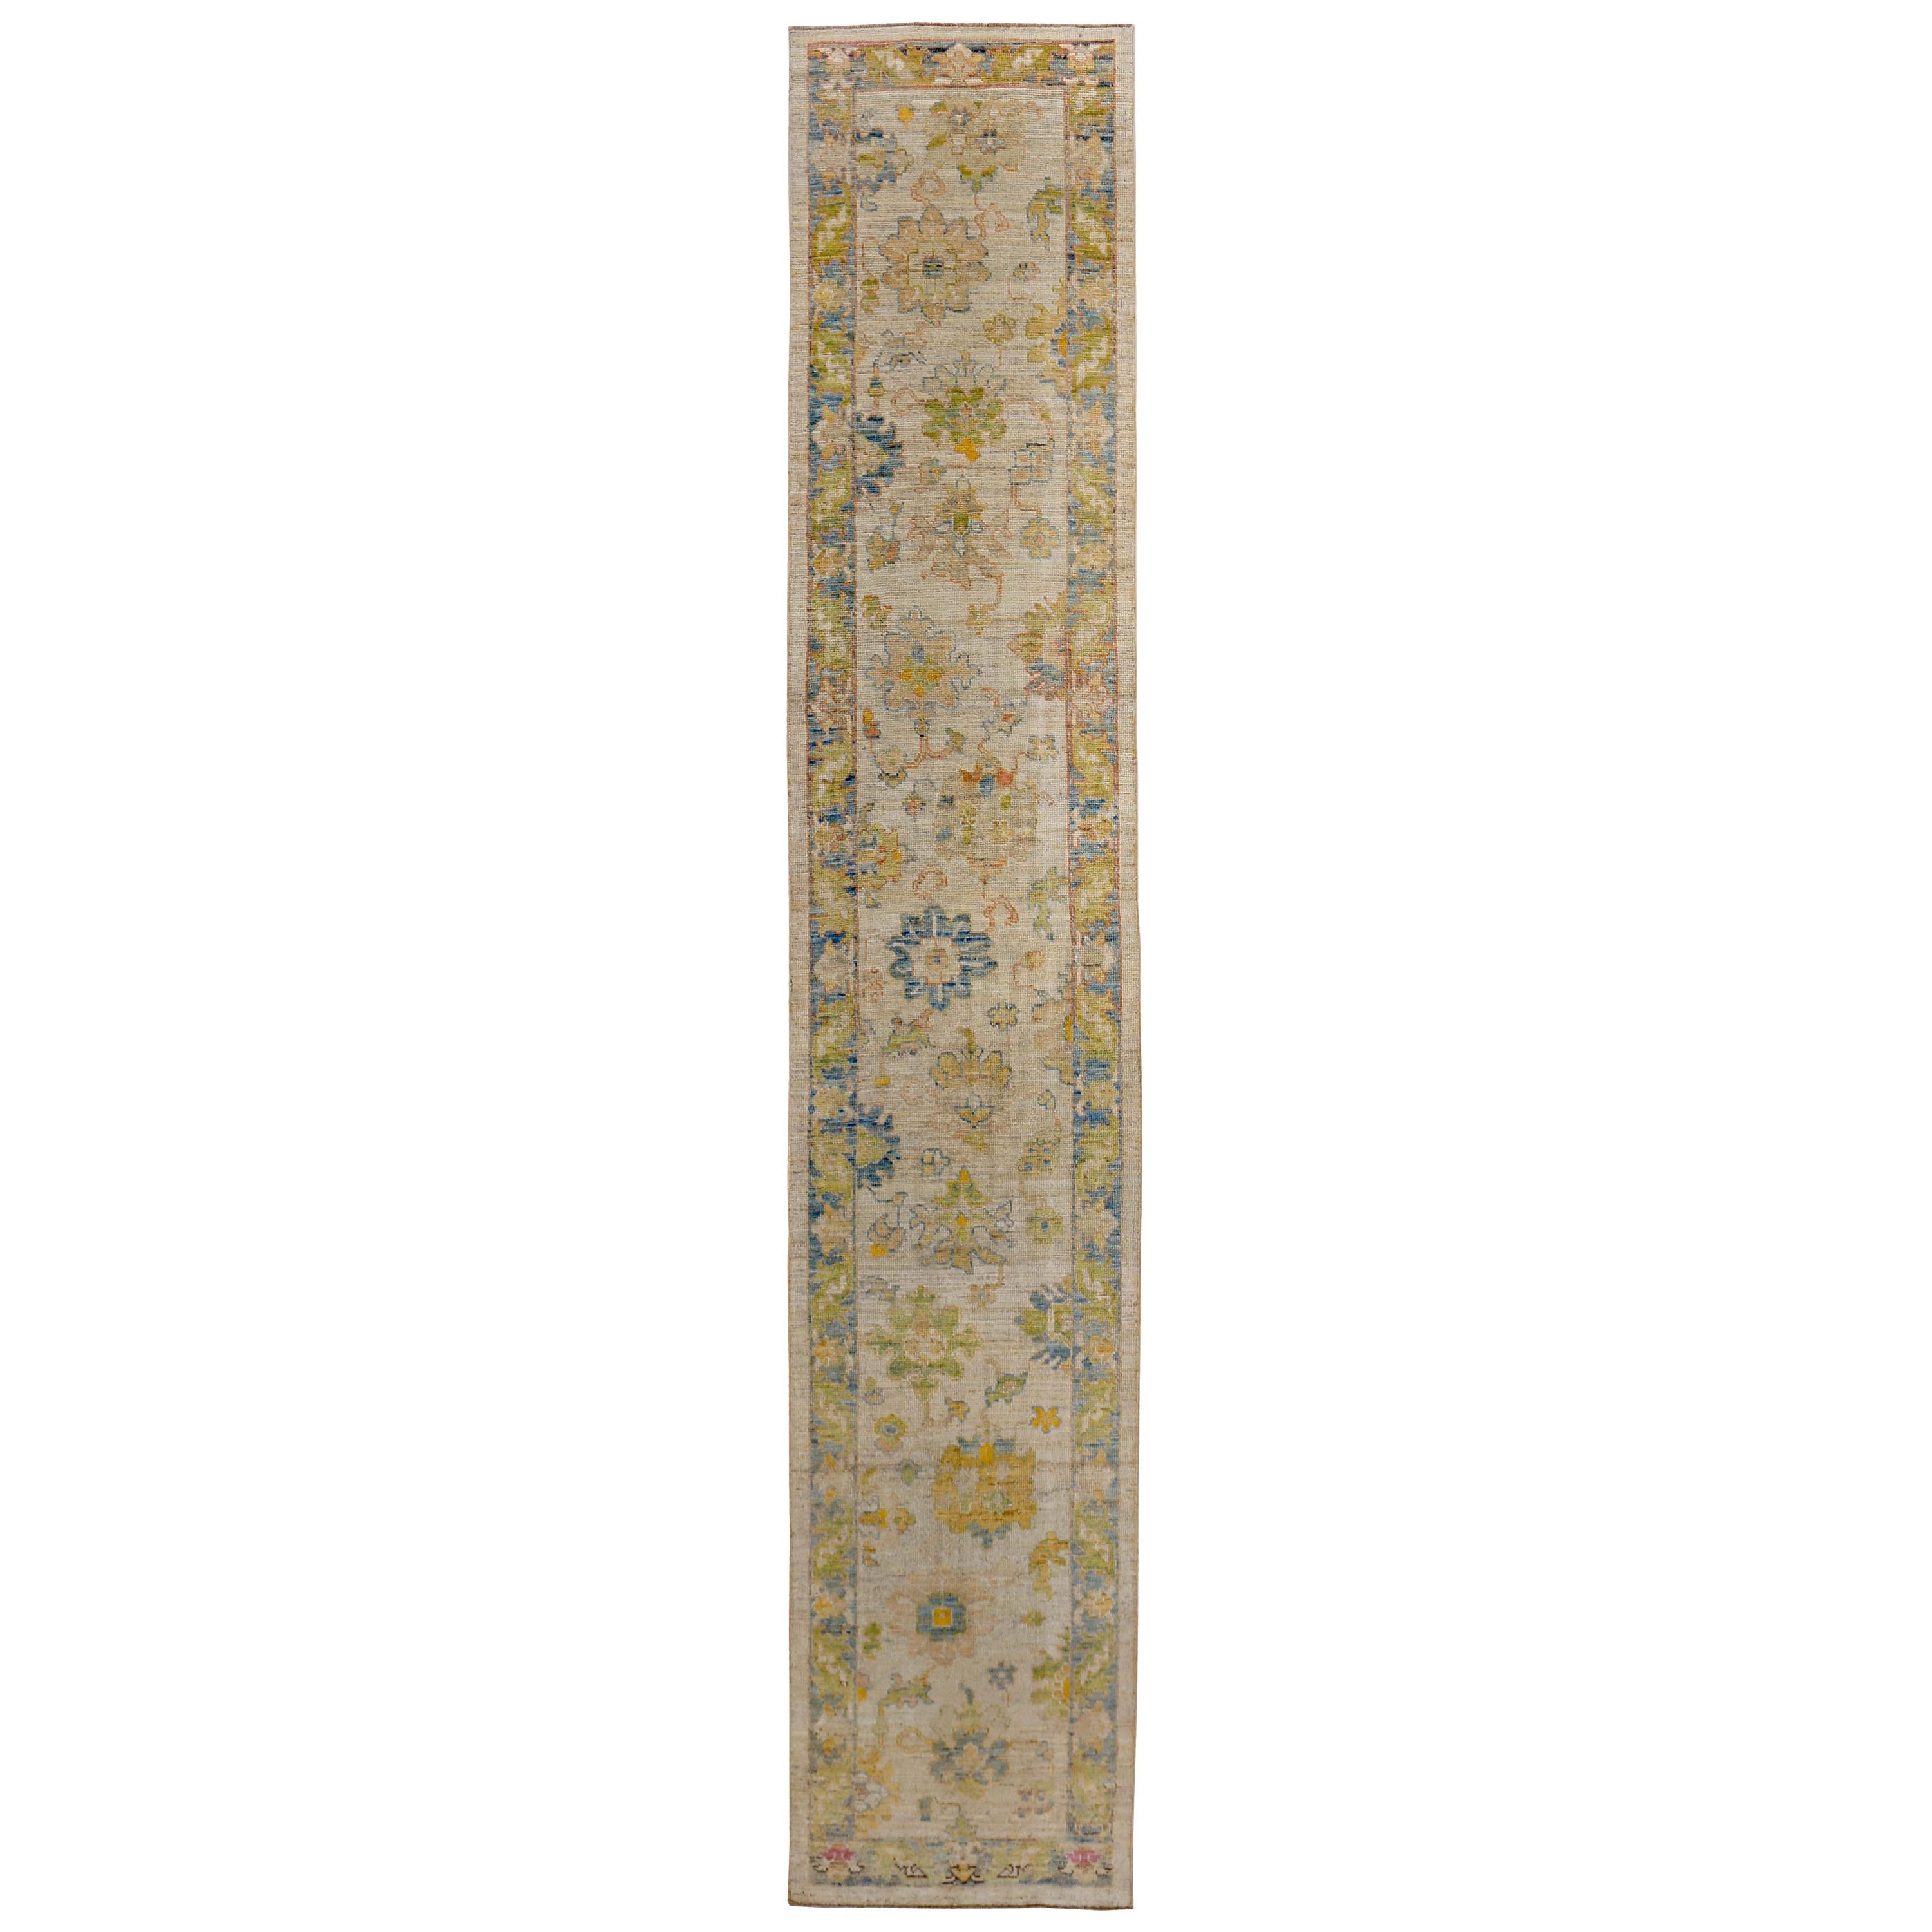 Turkish Oushak Runner Rug with Blue and Green Floral Patterns on Ivory Field For Sale